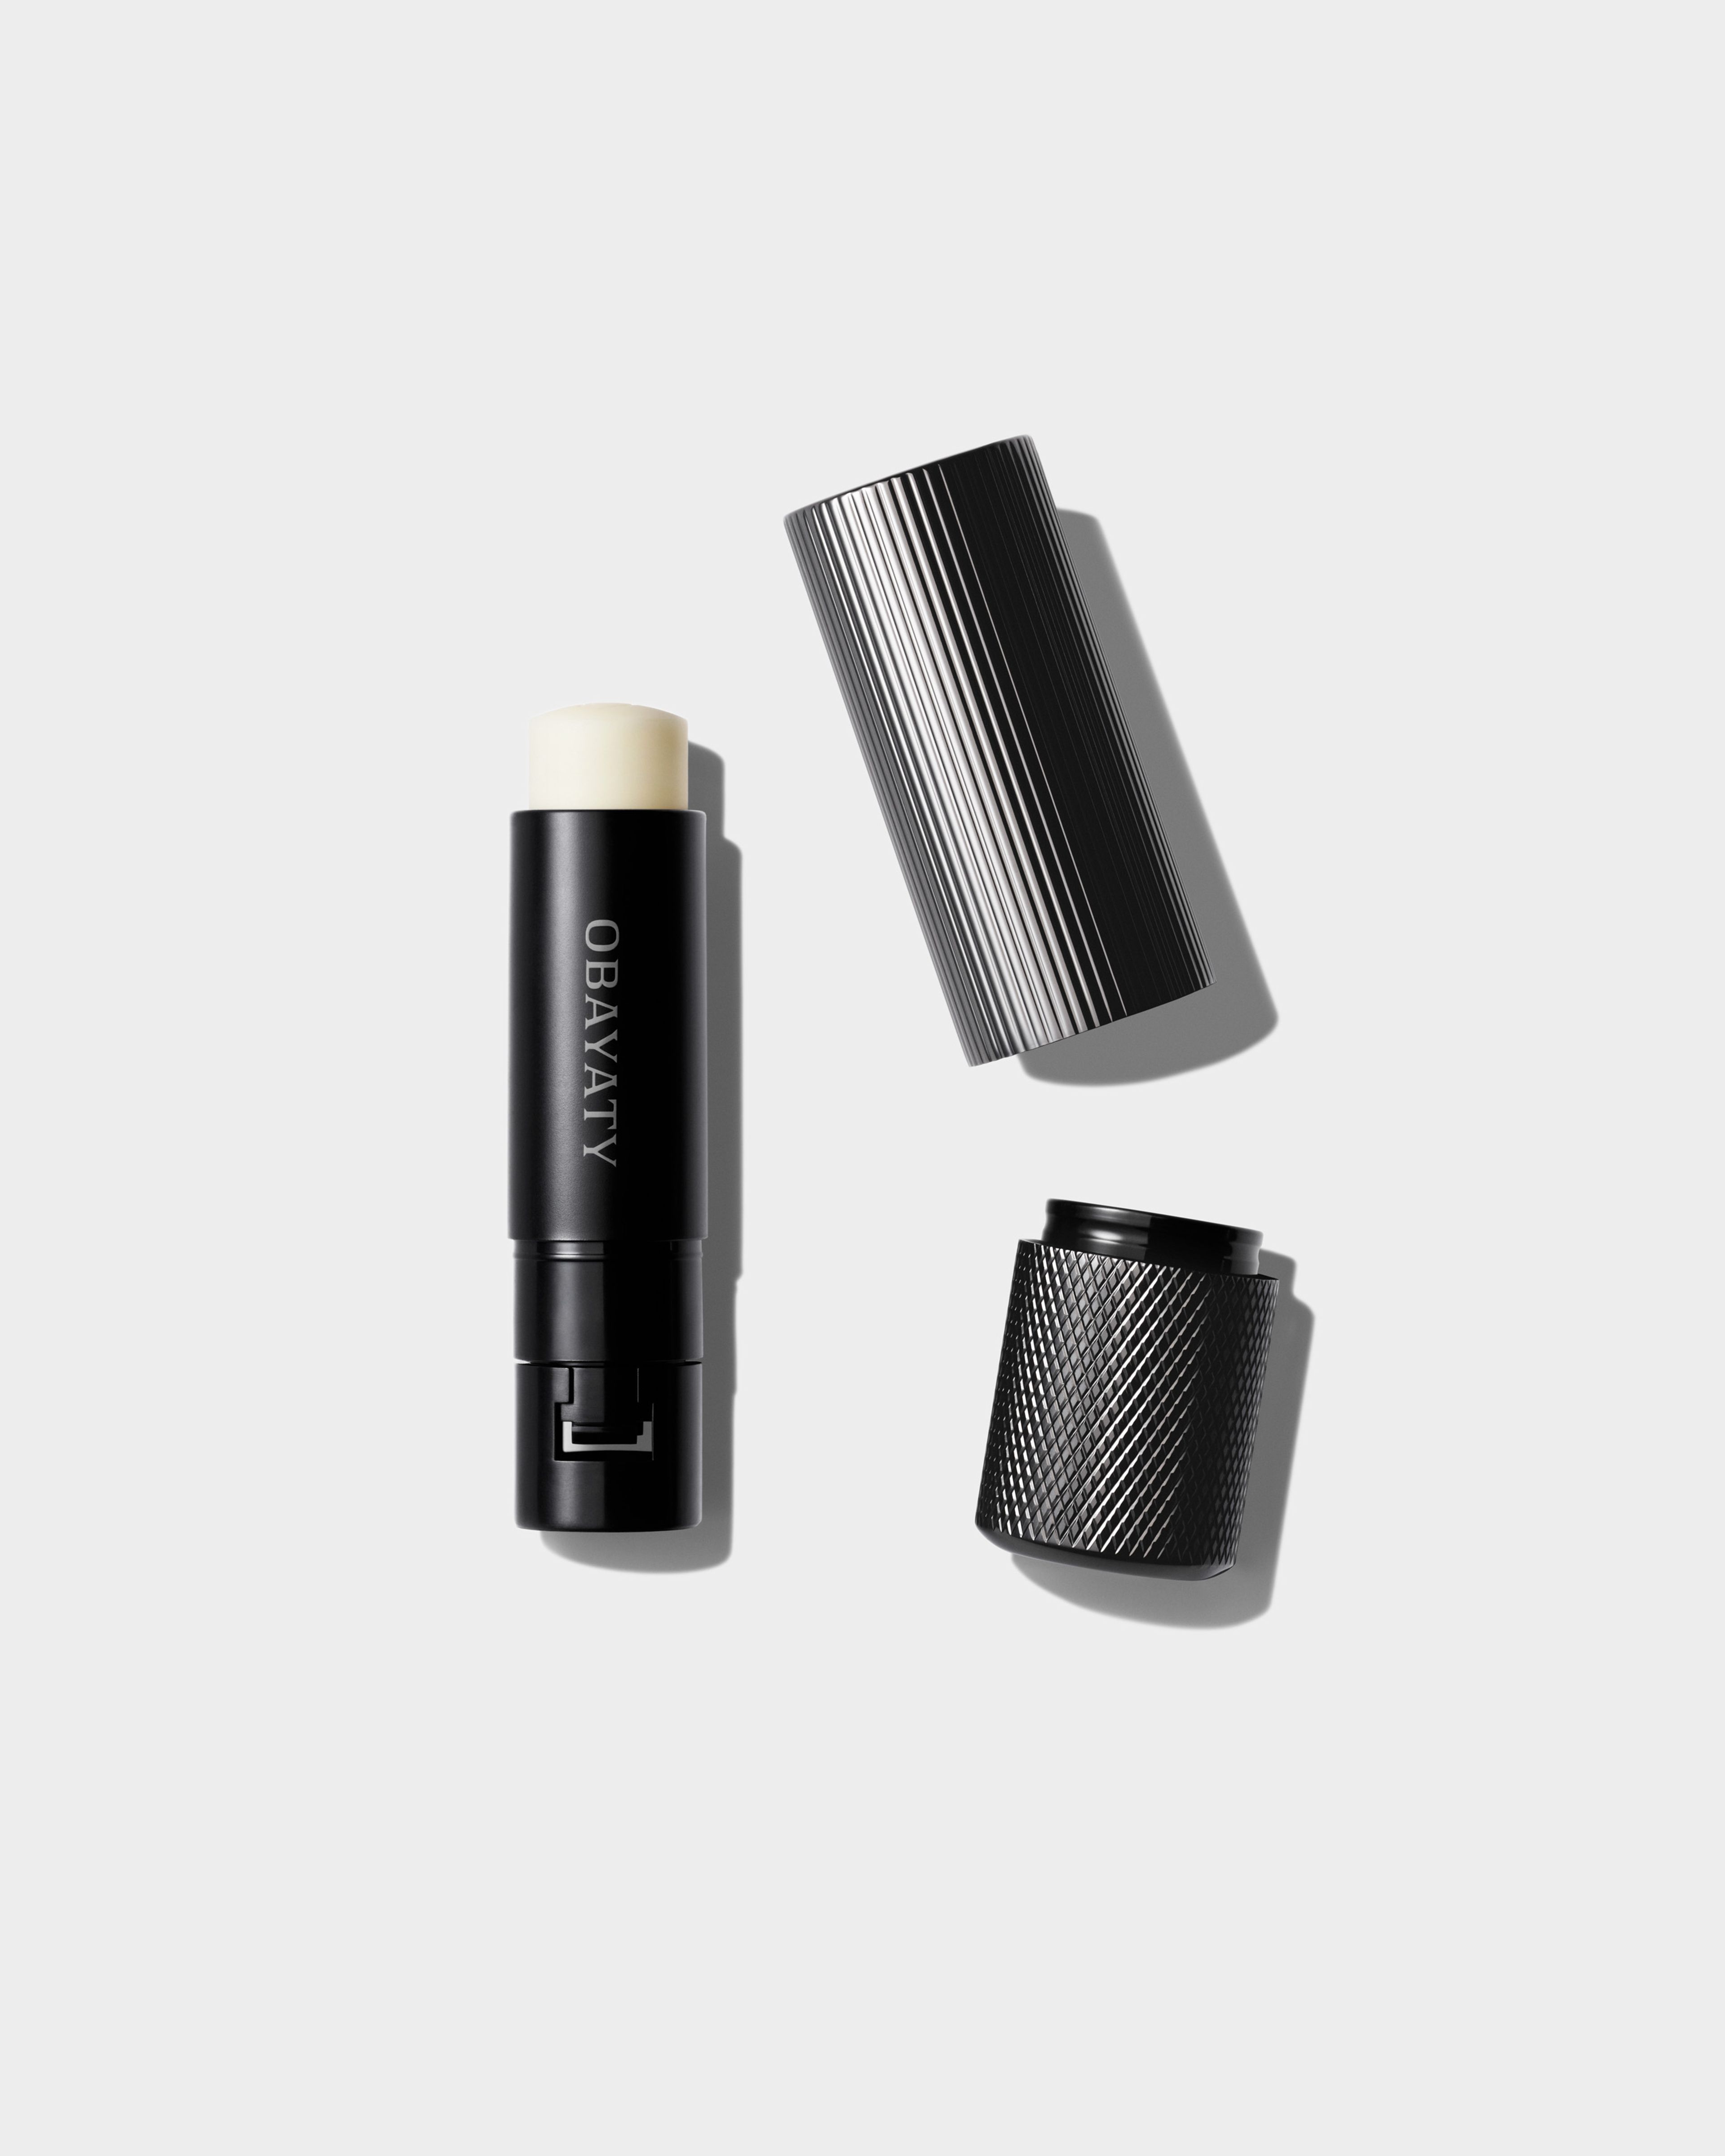 Soothing Lip Balm case and refill laying on a grey background